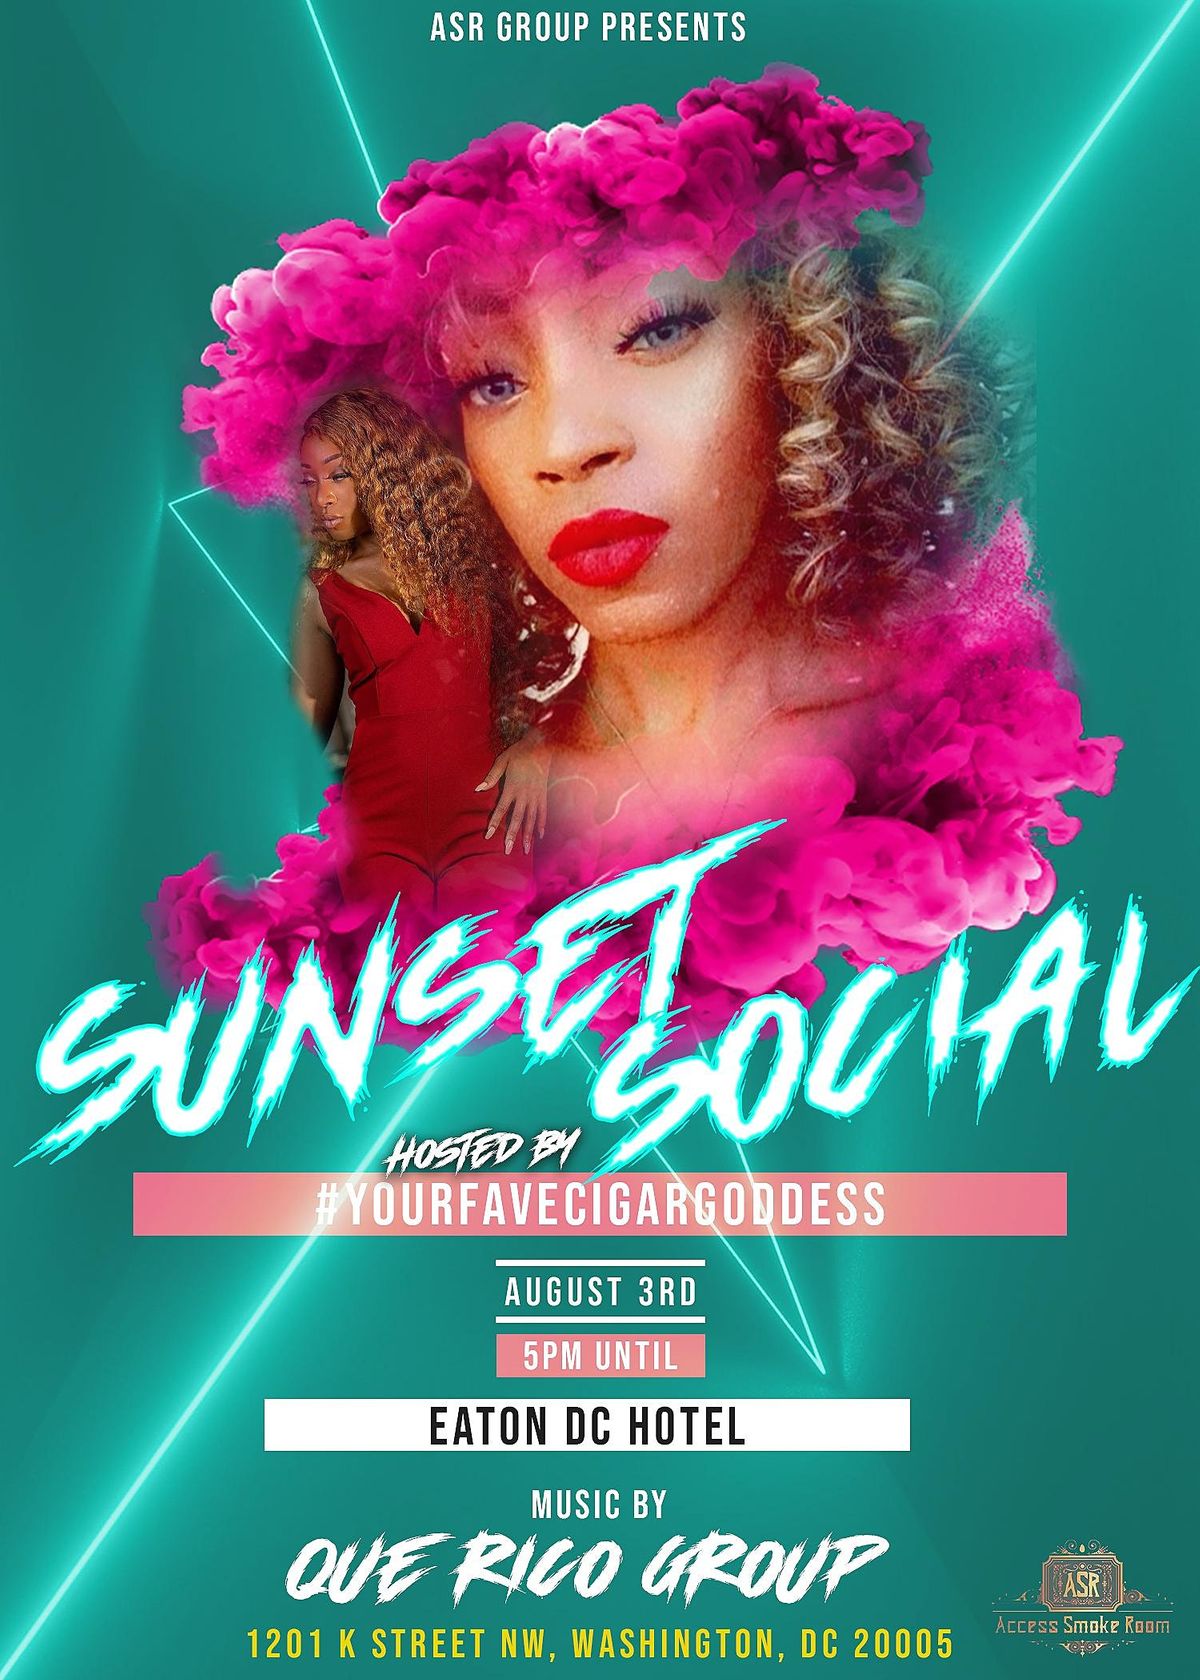 ASR Presents : Sunset Social at Eaton DC Hotel Rooftop